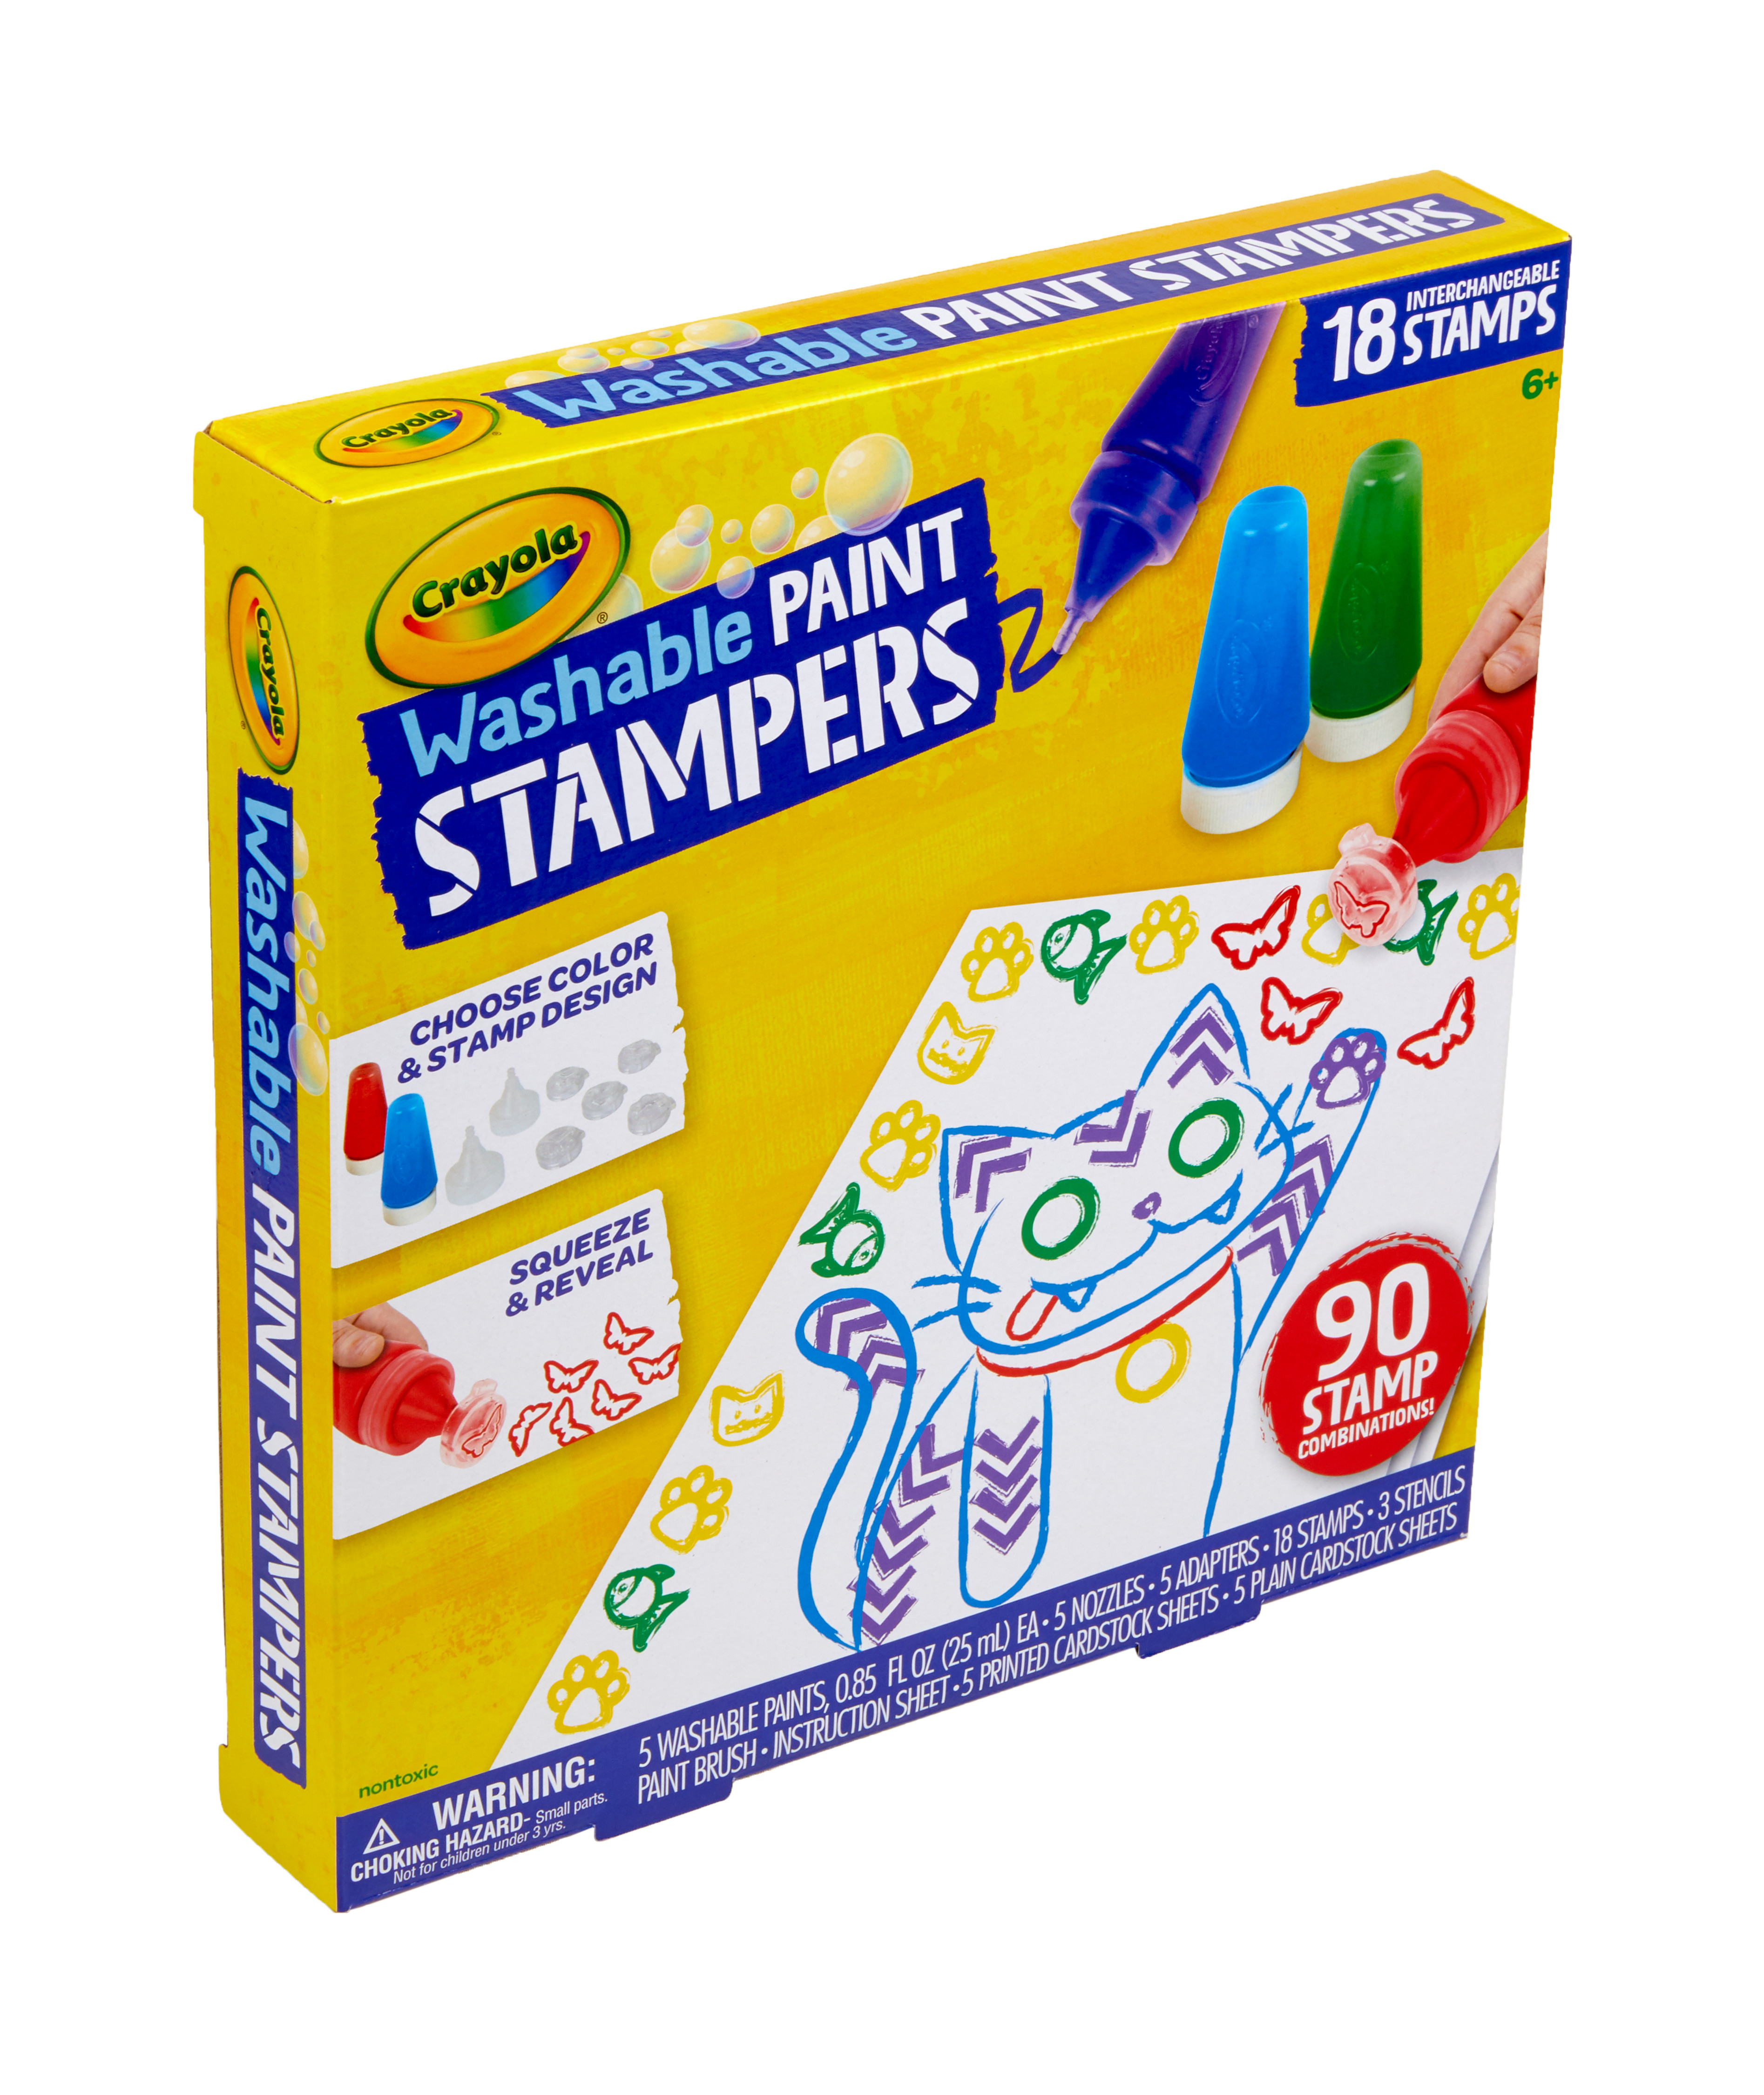 Crayola Washable Paint Stampers, Kids Paint Set, 45 Pieces, Beginner Child - image 5 of 9